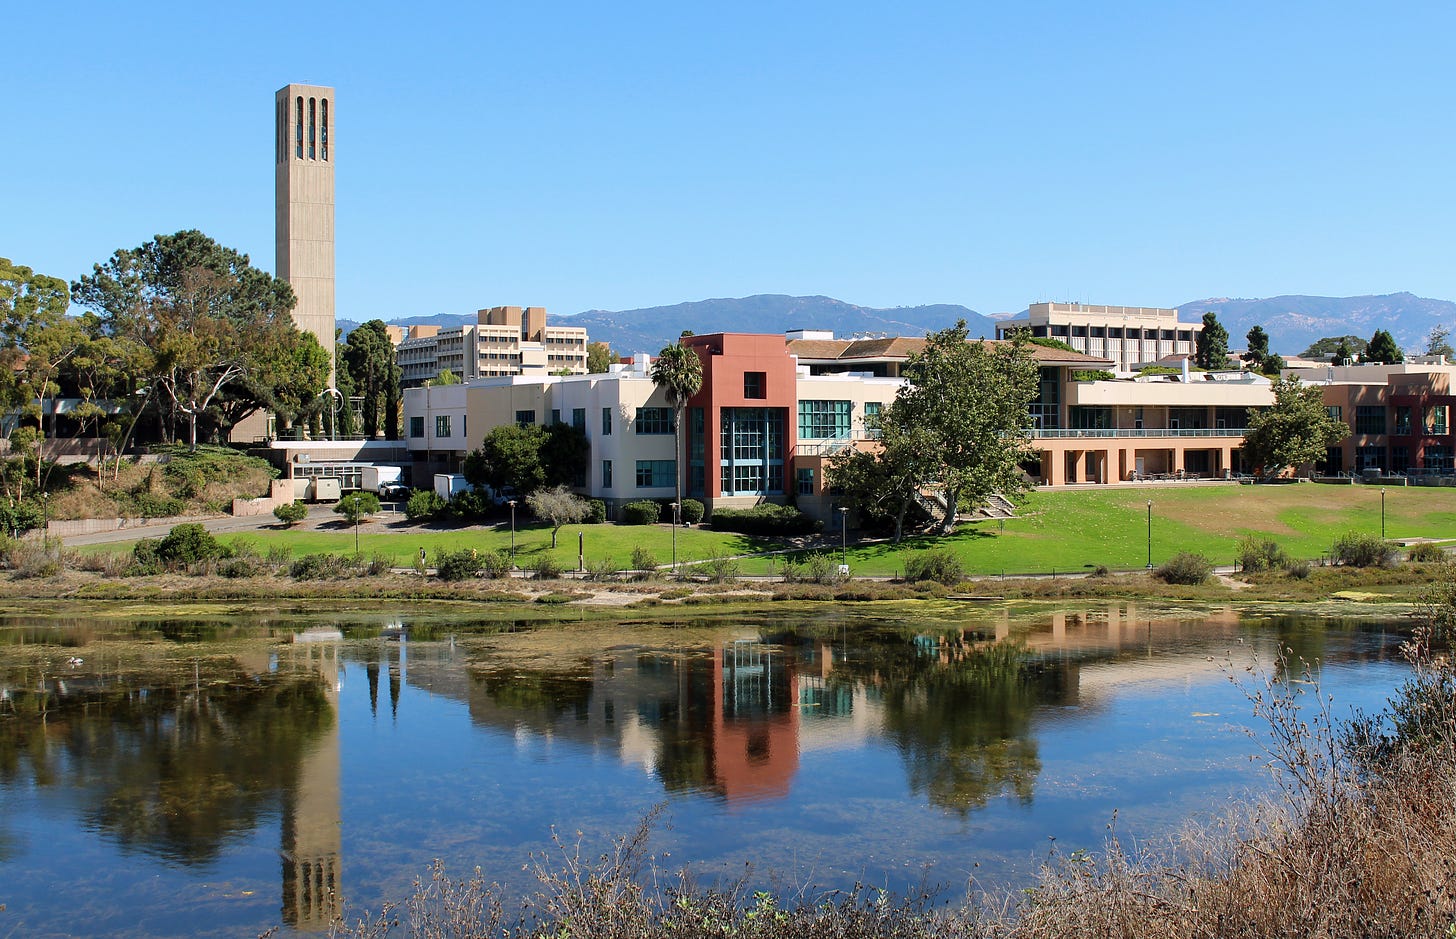 The UCSB campus